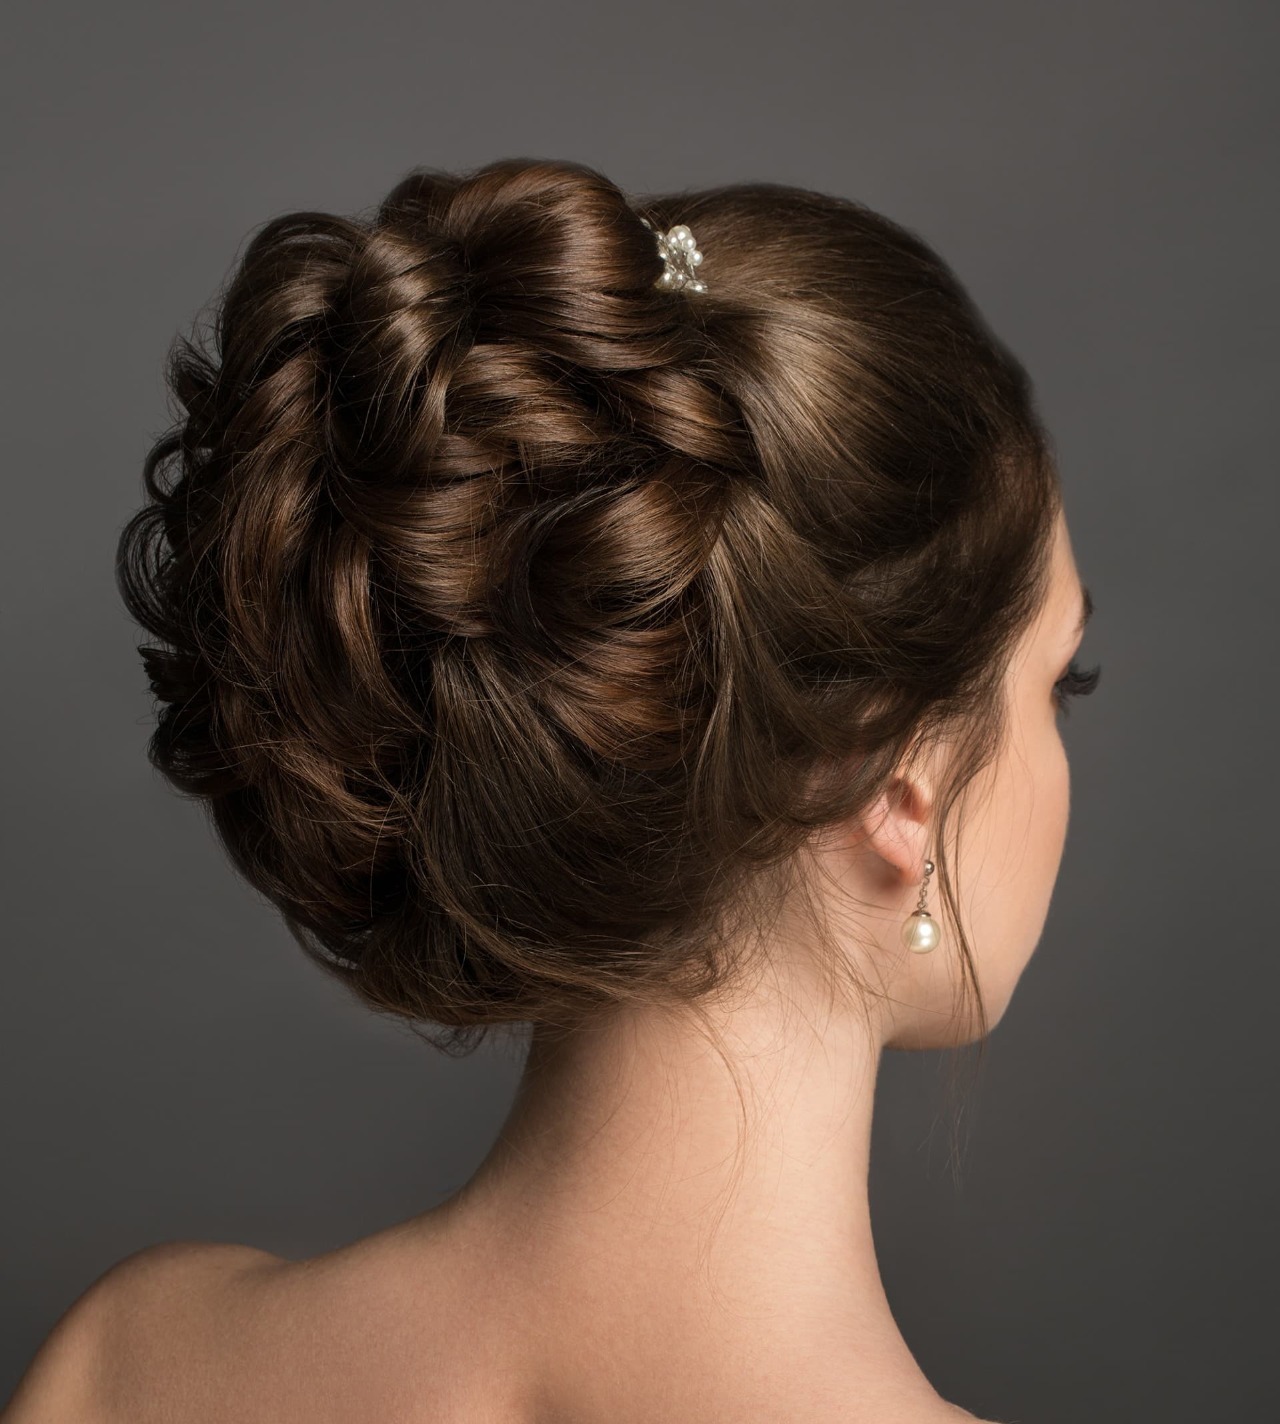 Classic Bride Hair Styling Course